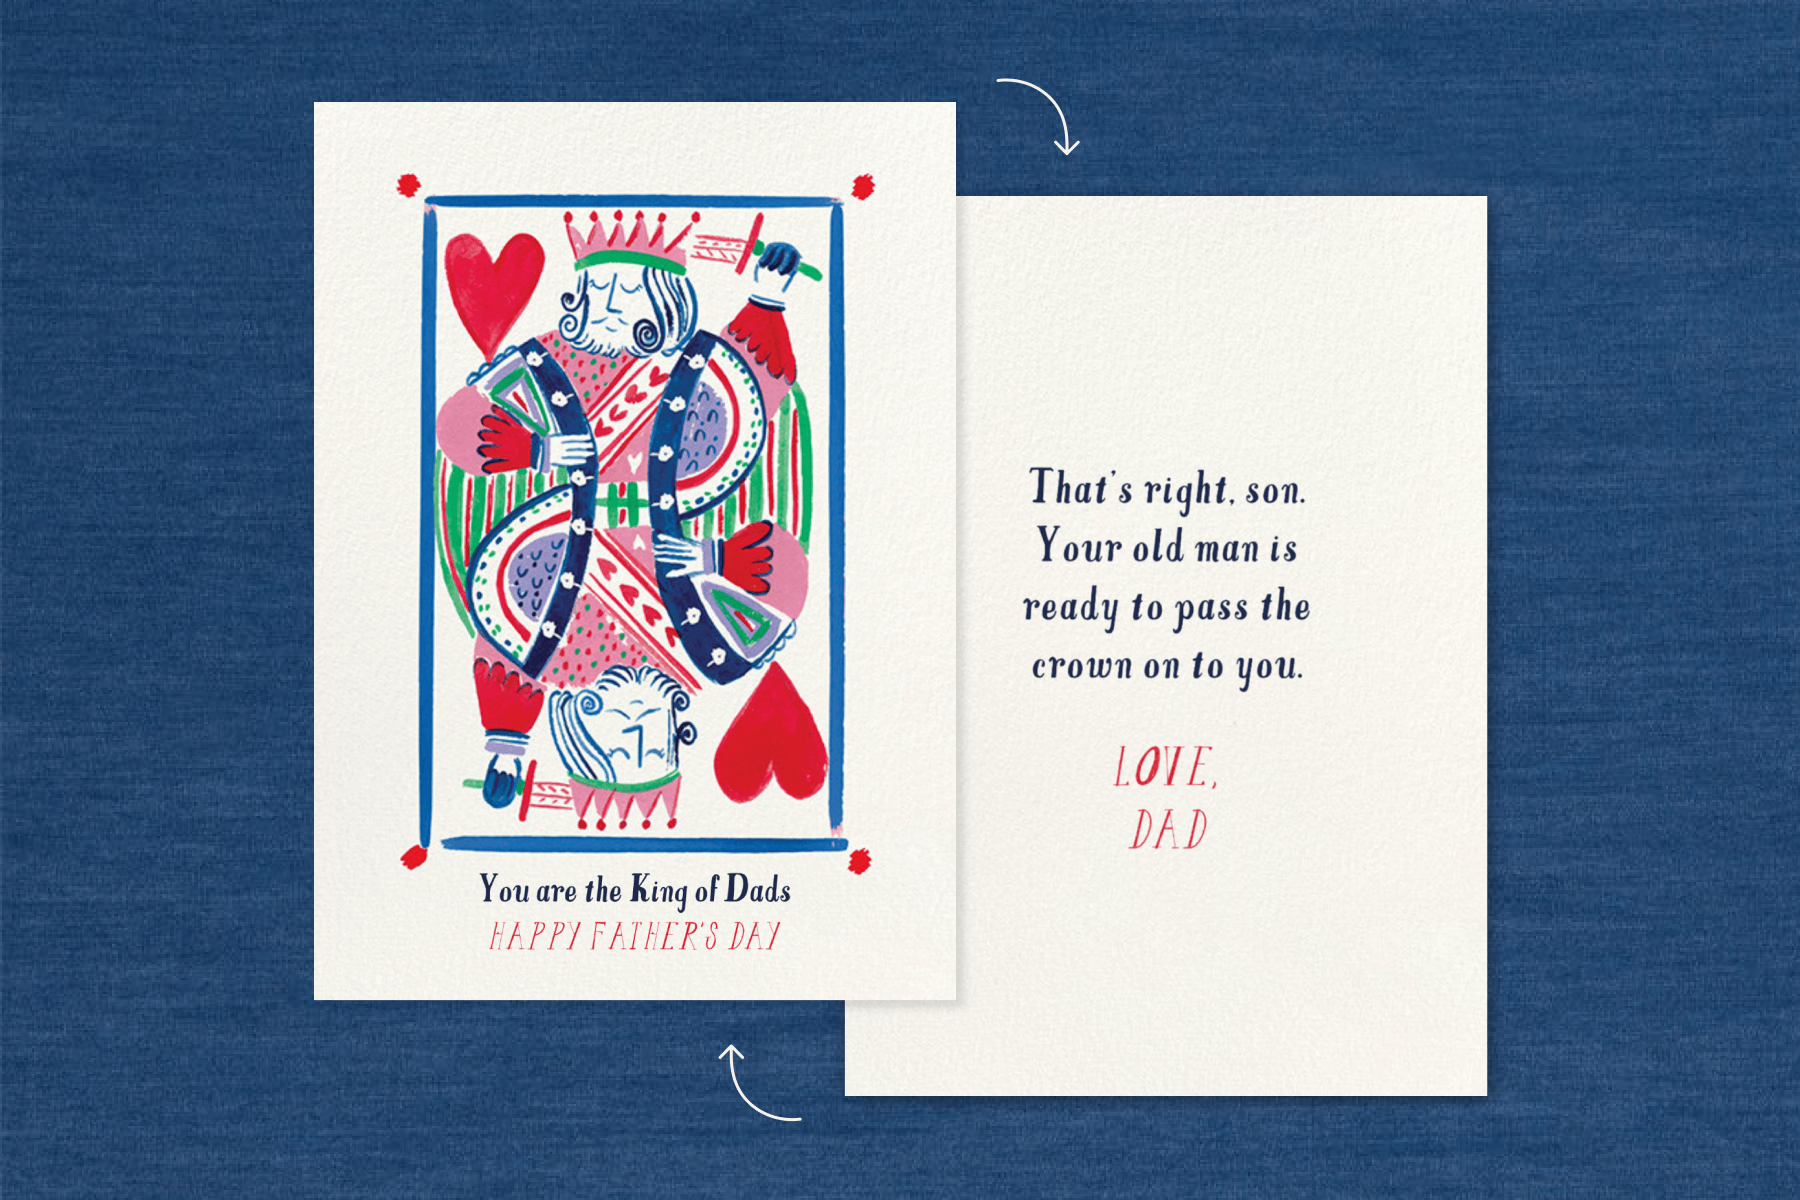 A Father’s Day card featuring an illustration of a playing card-style King of Hearts with the phrase “You are the King of Dads. Happy Father’s Day!” The back of the card is also shown with a sample message also listed in the suggestions below.